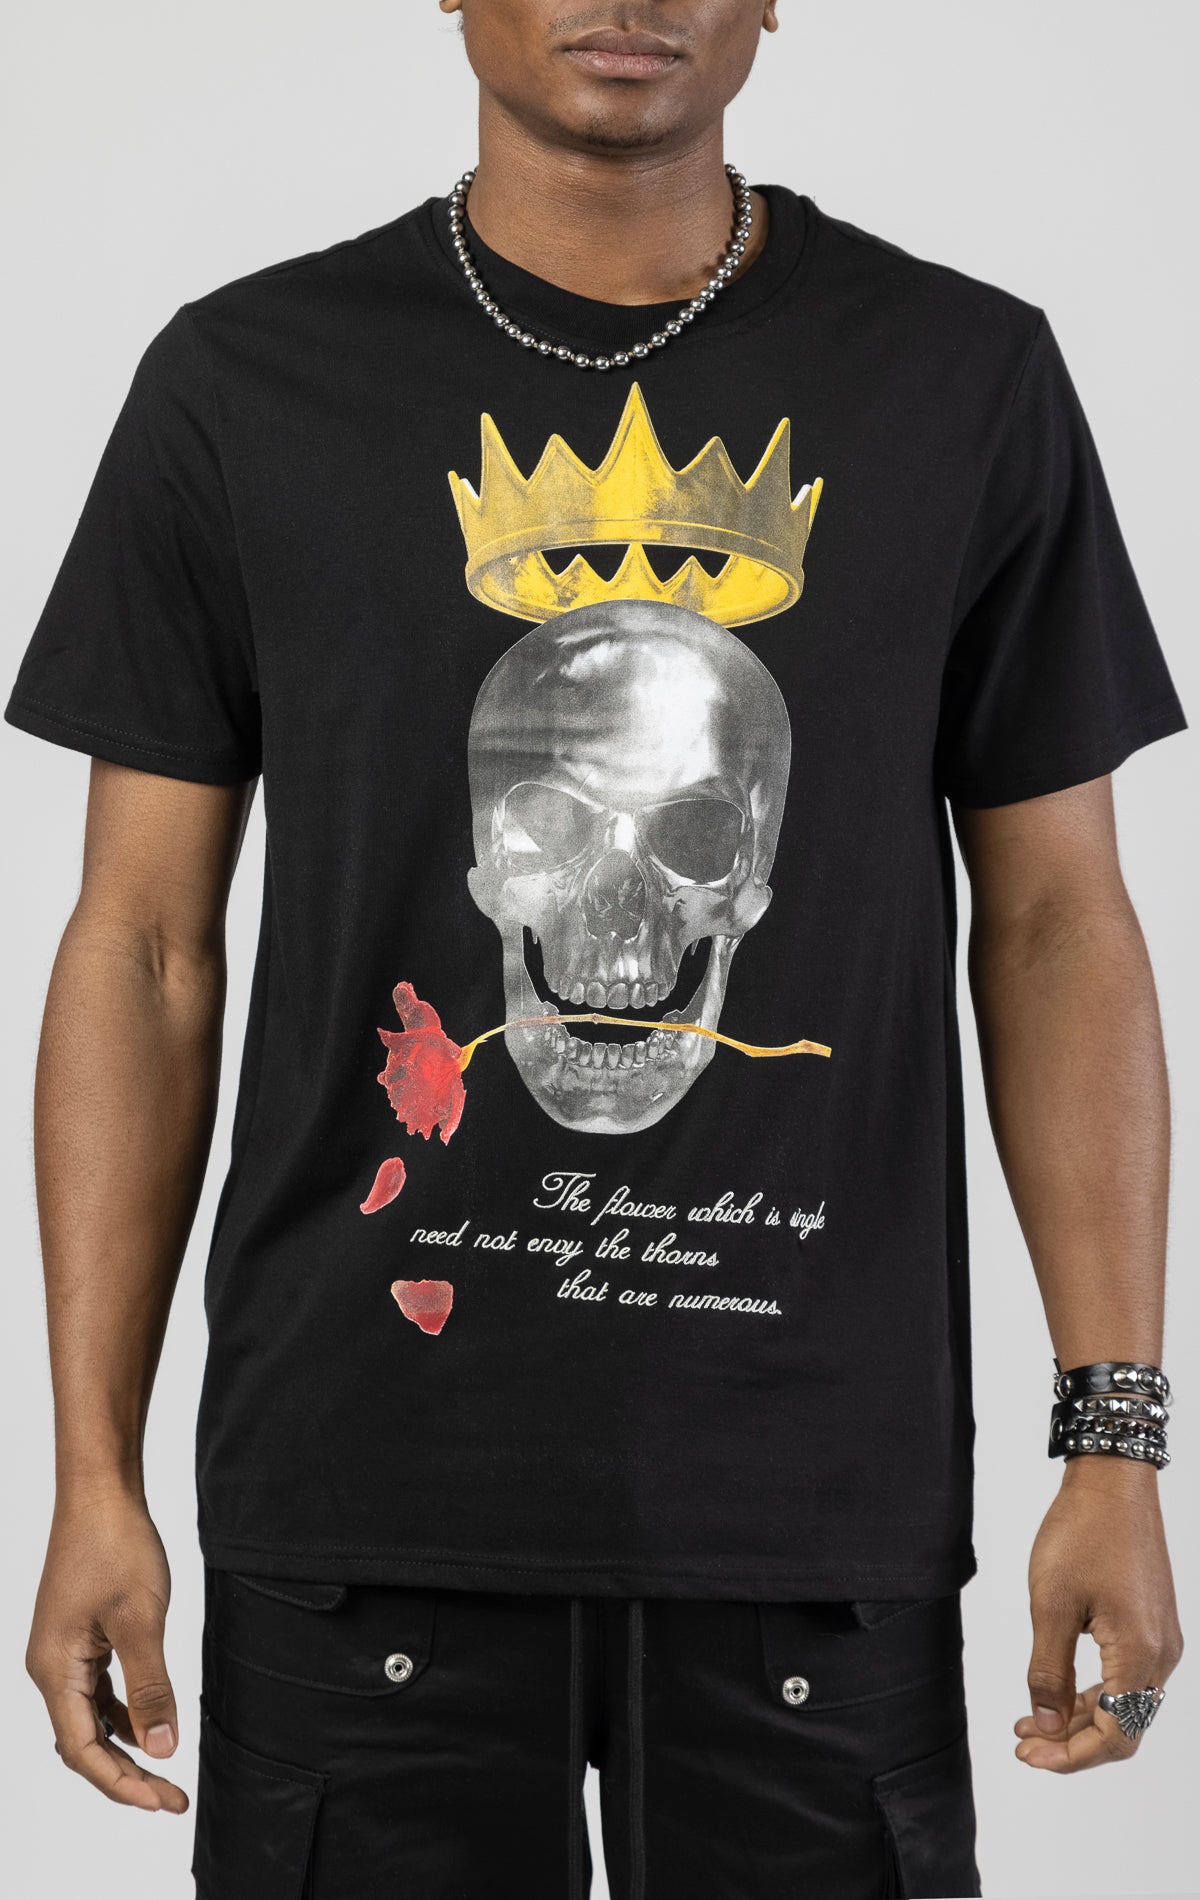 Graphic crewneck t-shirt in black featuring a skull king design on the front.  The shirt is made from a blend of 65% polyester and 35% cotton.